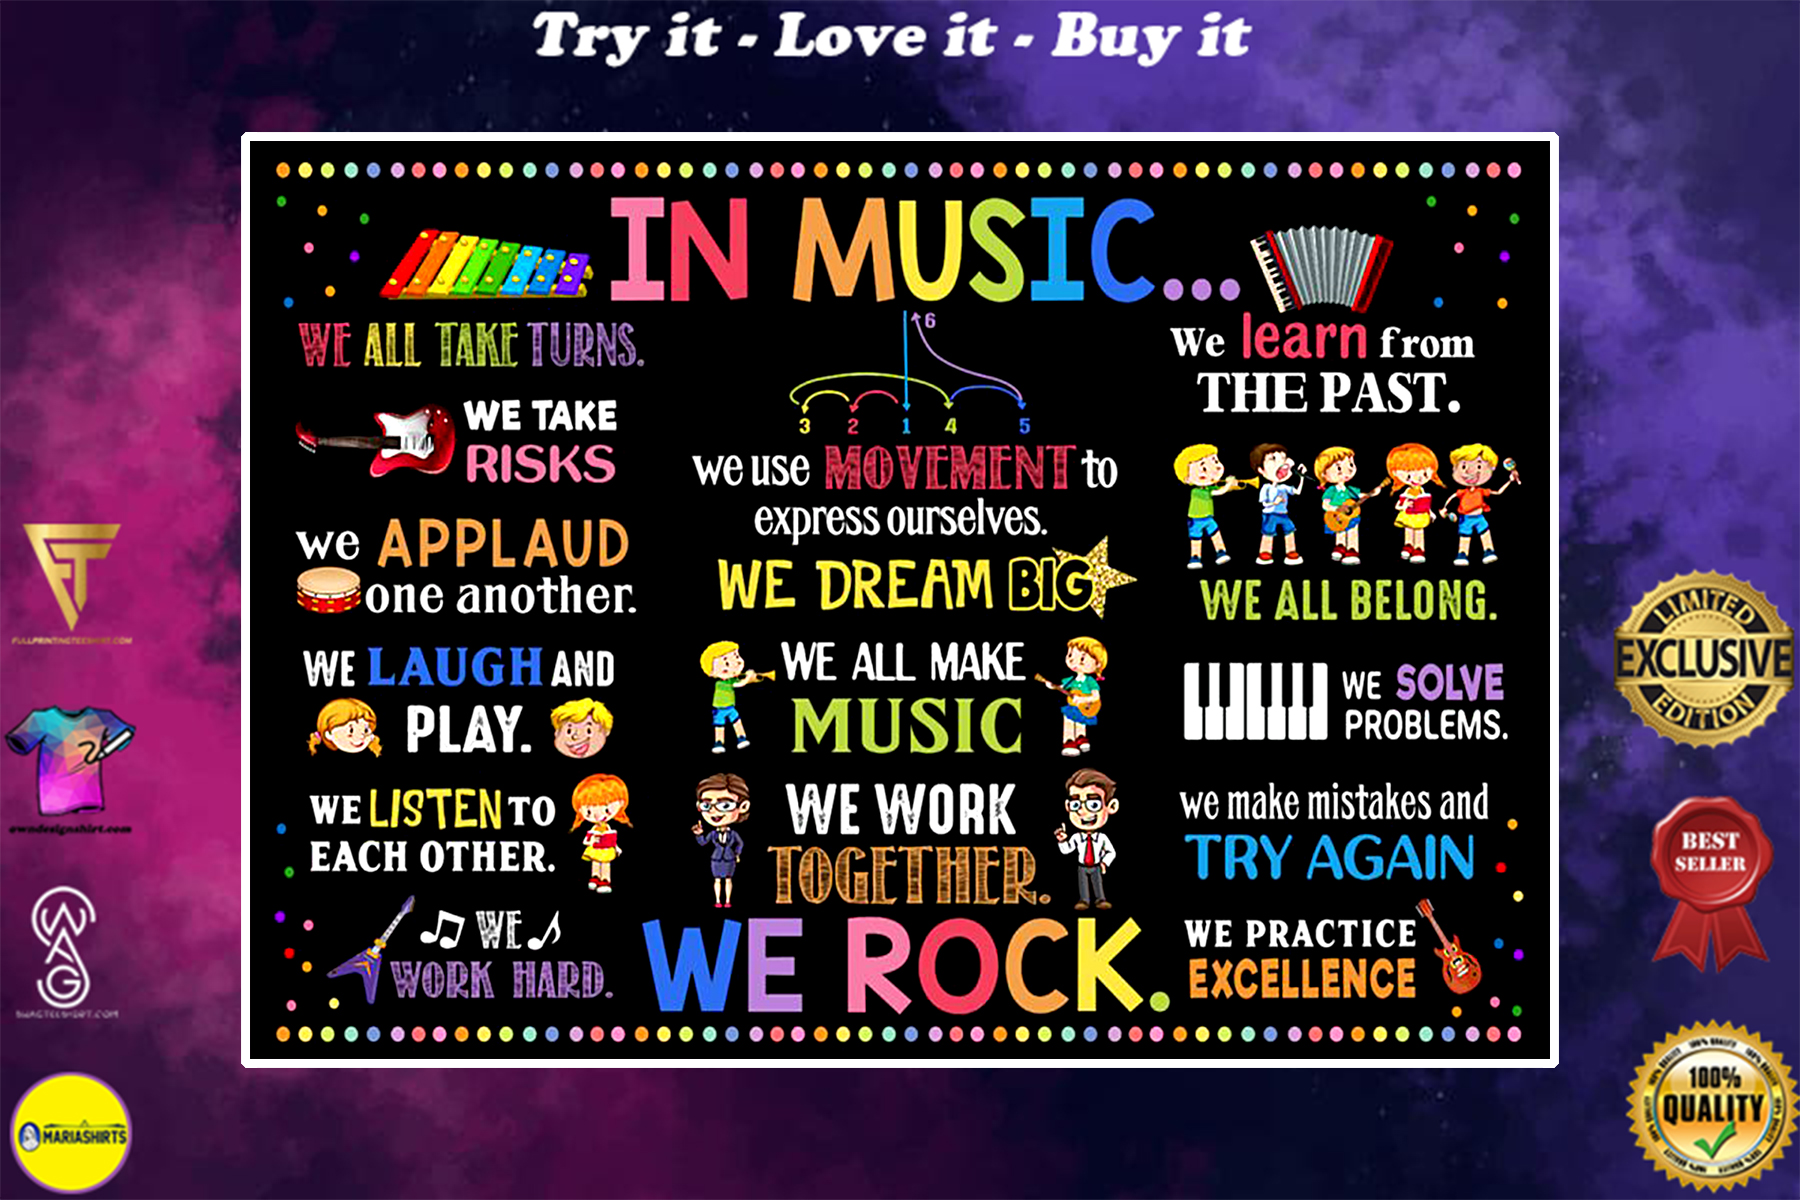 in music we all make music we work together we rock poster